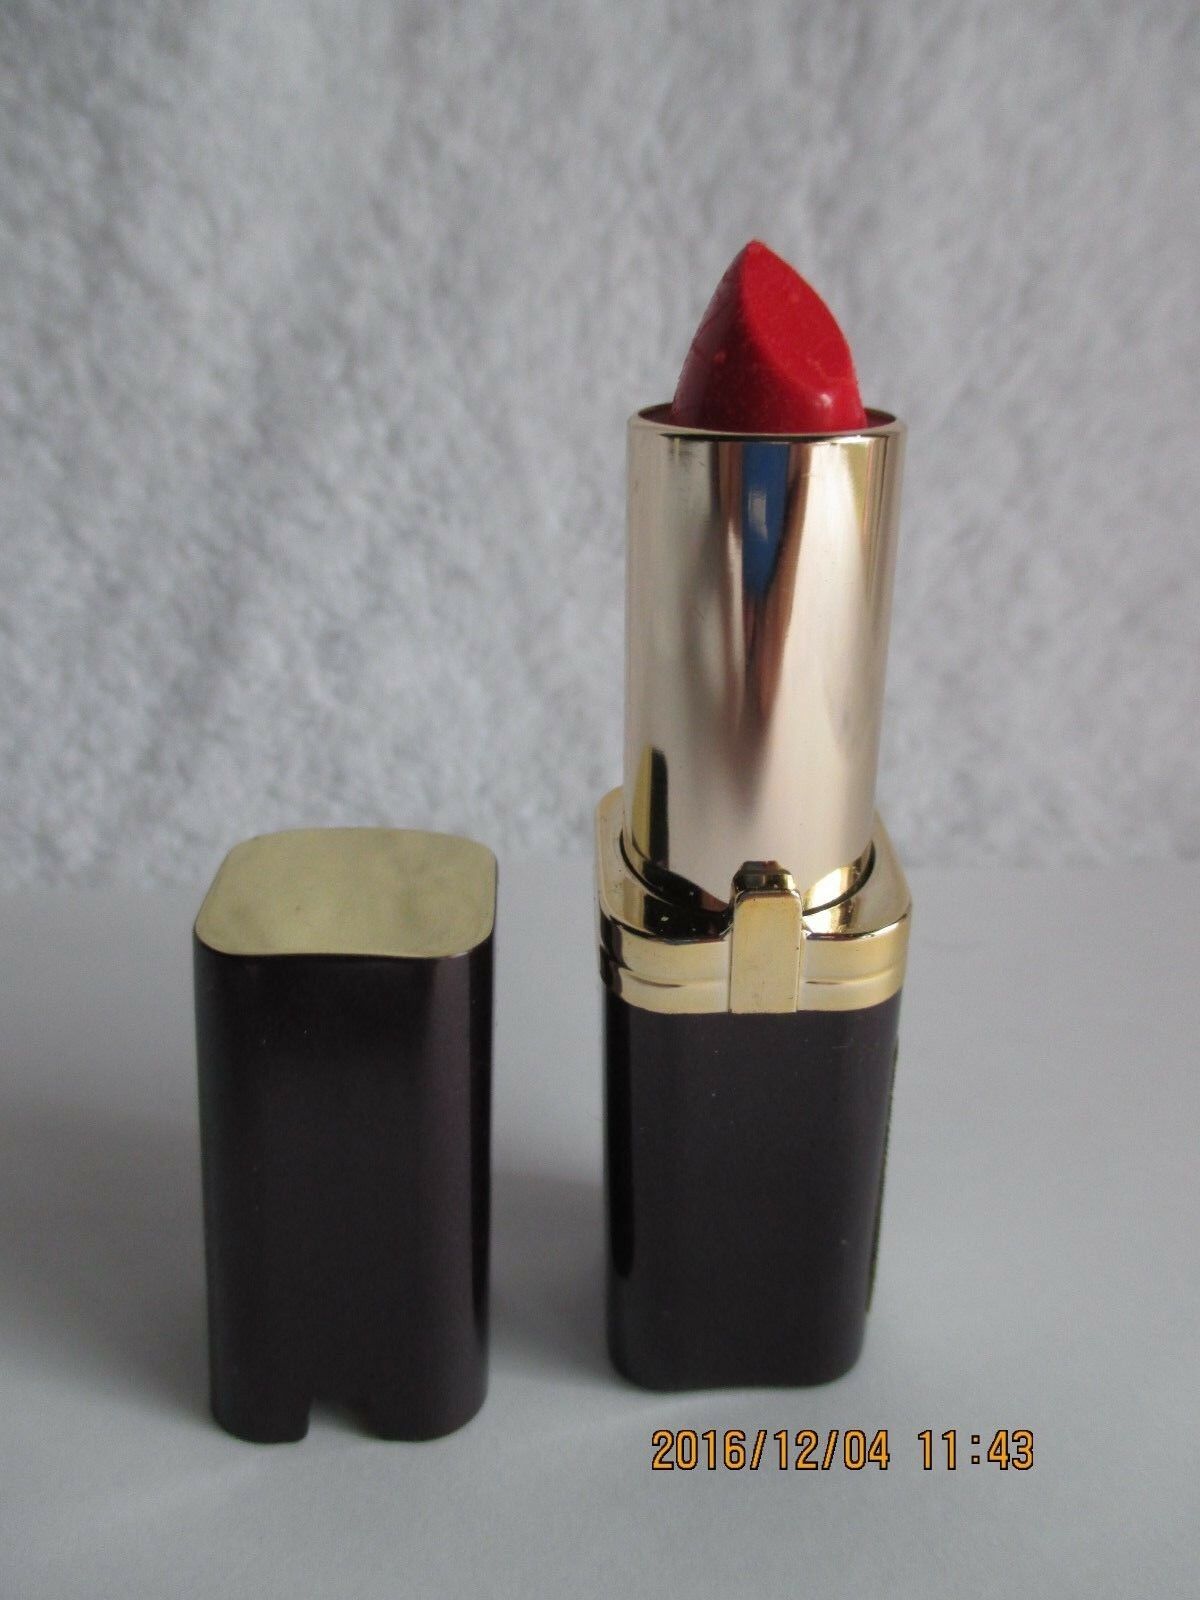 Vintage L'oreal Lipstick #216 "red" Health & Beauty Makeup New